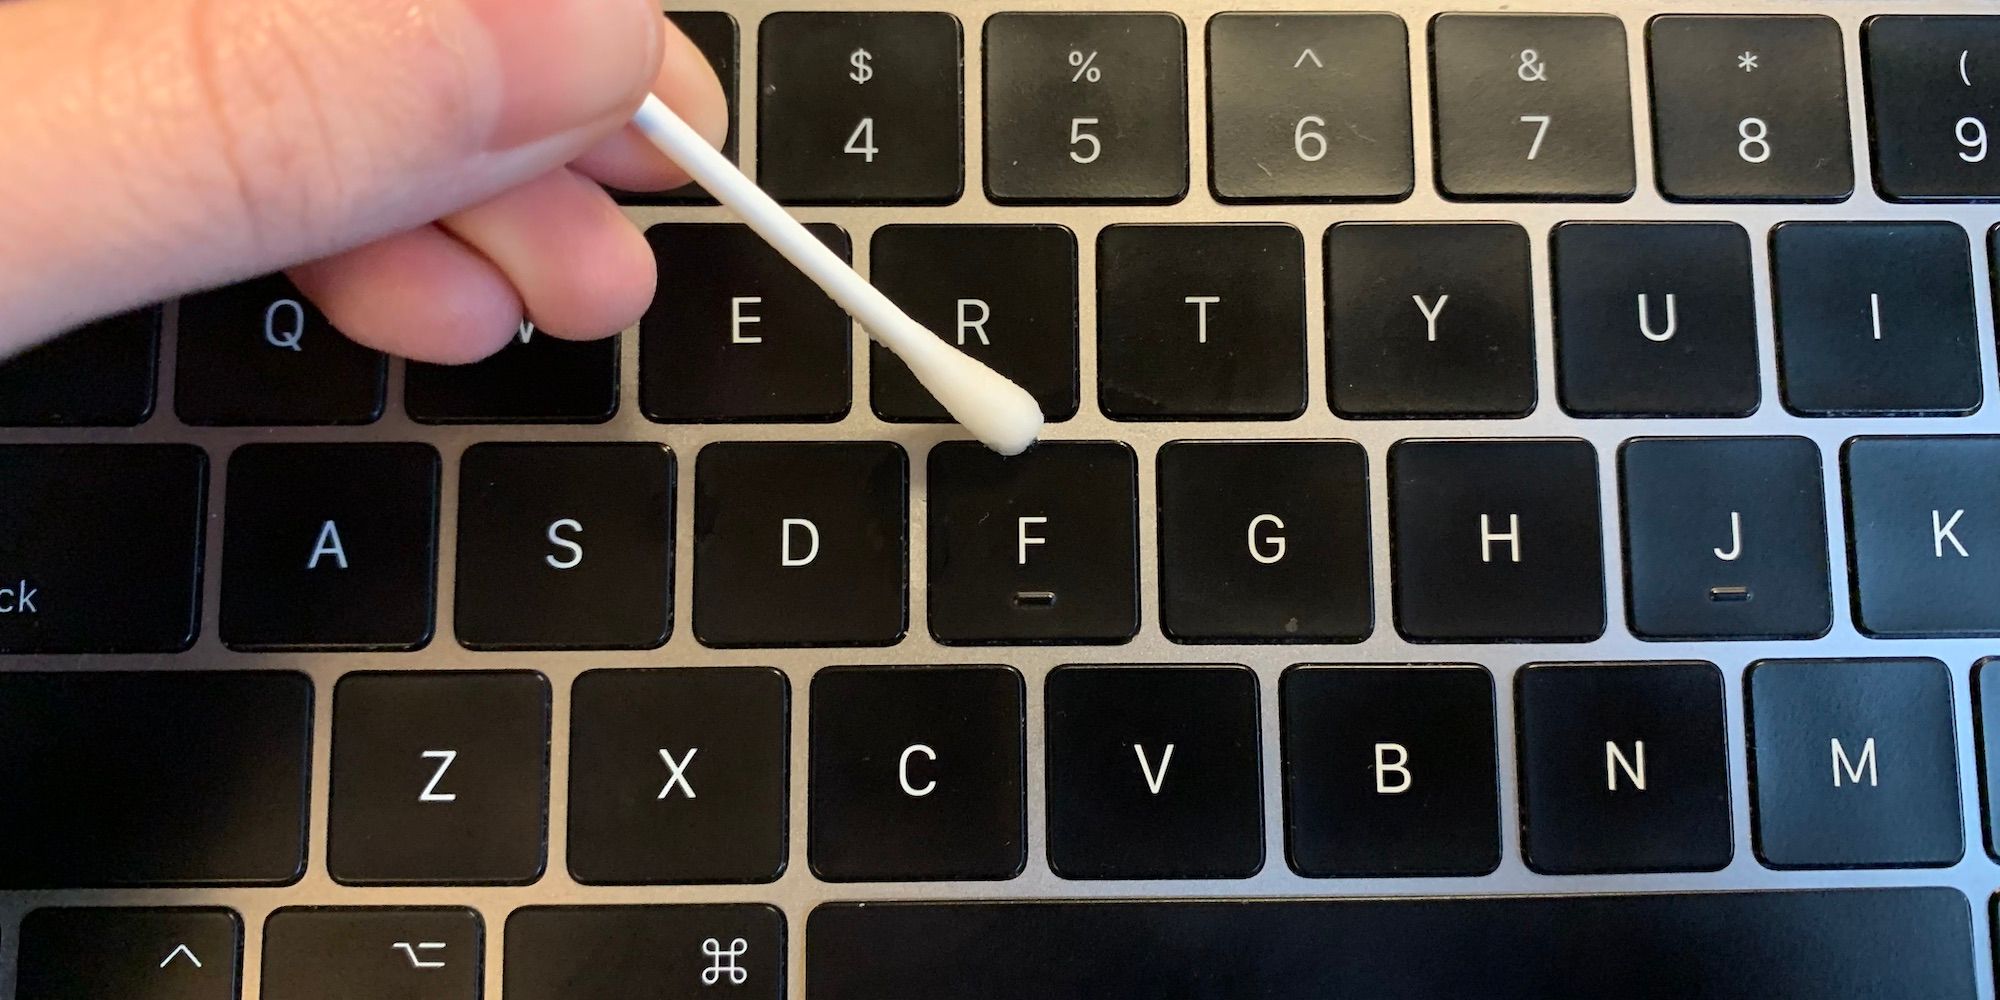 how to clean a macbook key